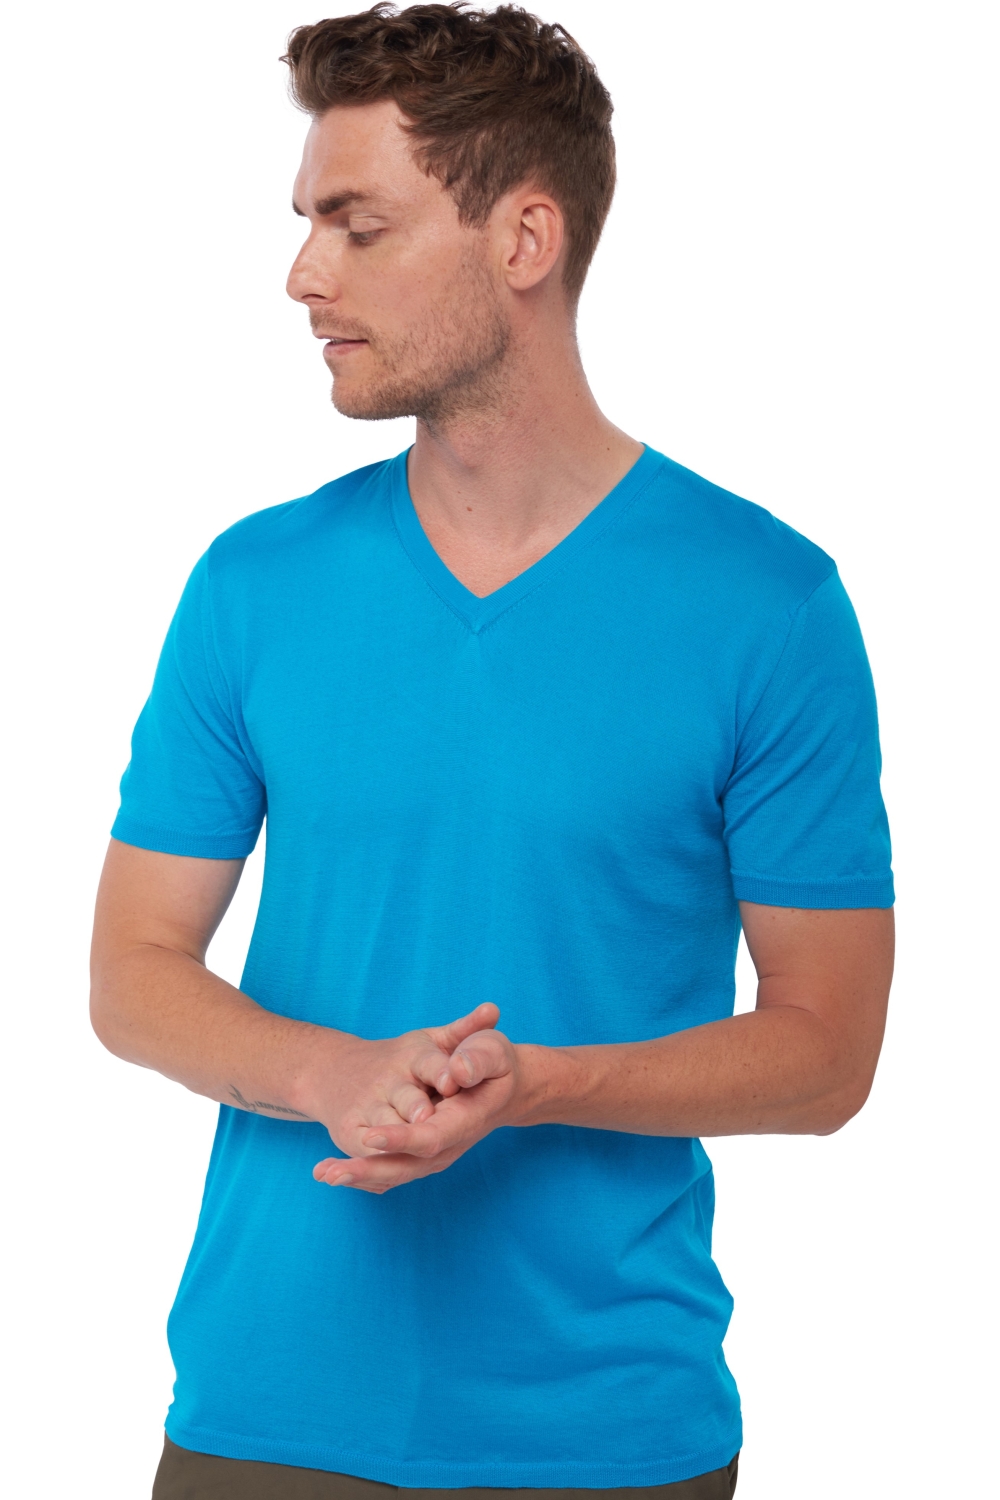 Coton Giza 45 pull homme col v michael turquoise m